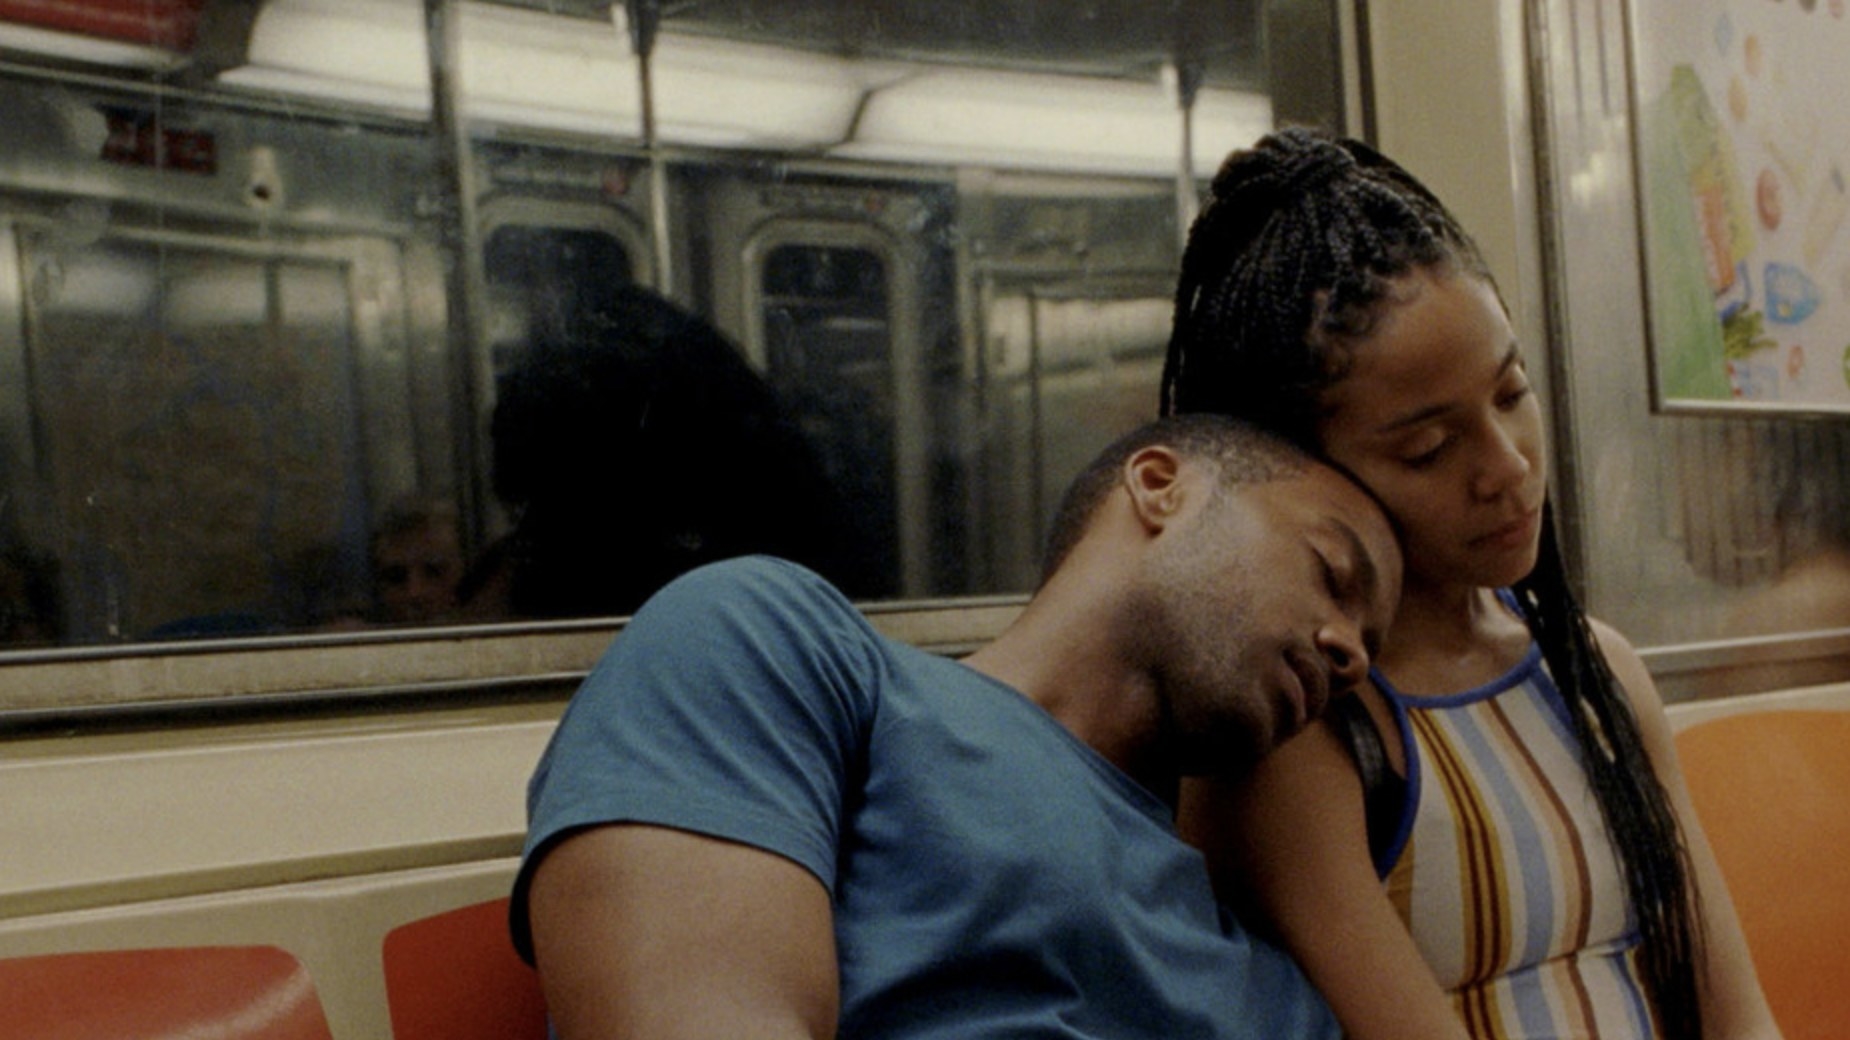 Ayanna and Isaiah sitting on the subway together